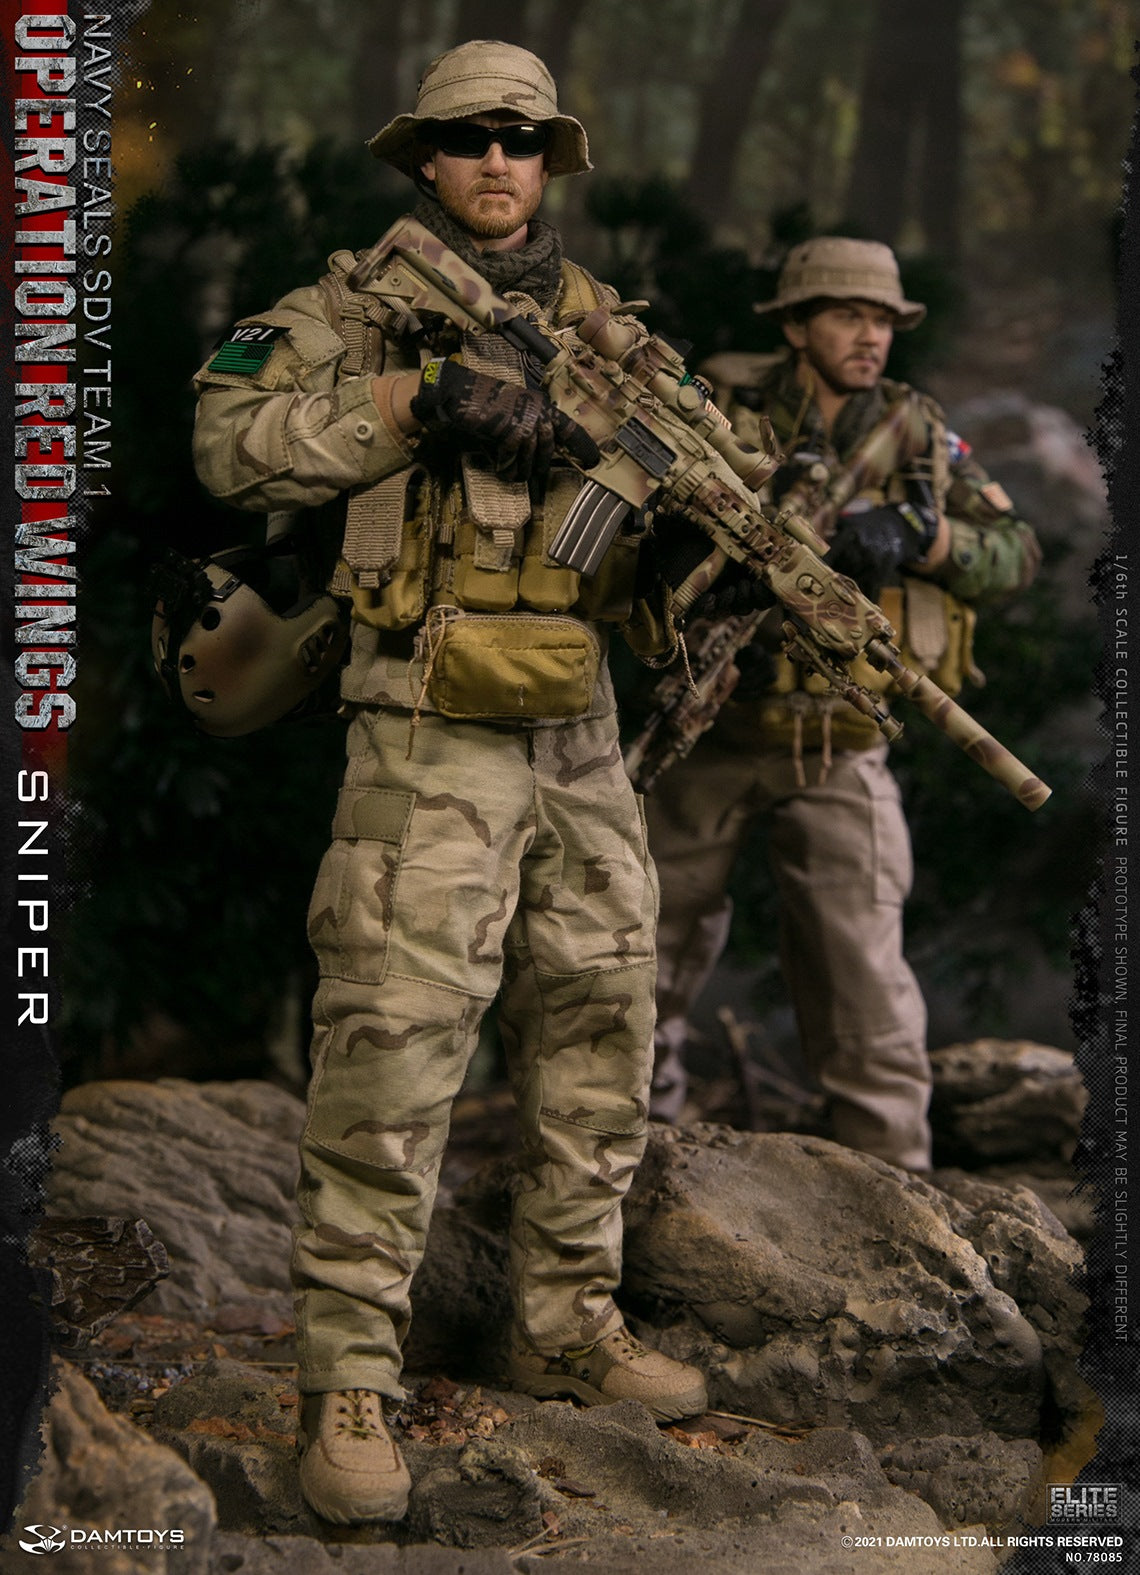 DamToys (78085) 1/6 Scale Operation Red Wings - NAVY SEALS SDV